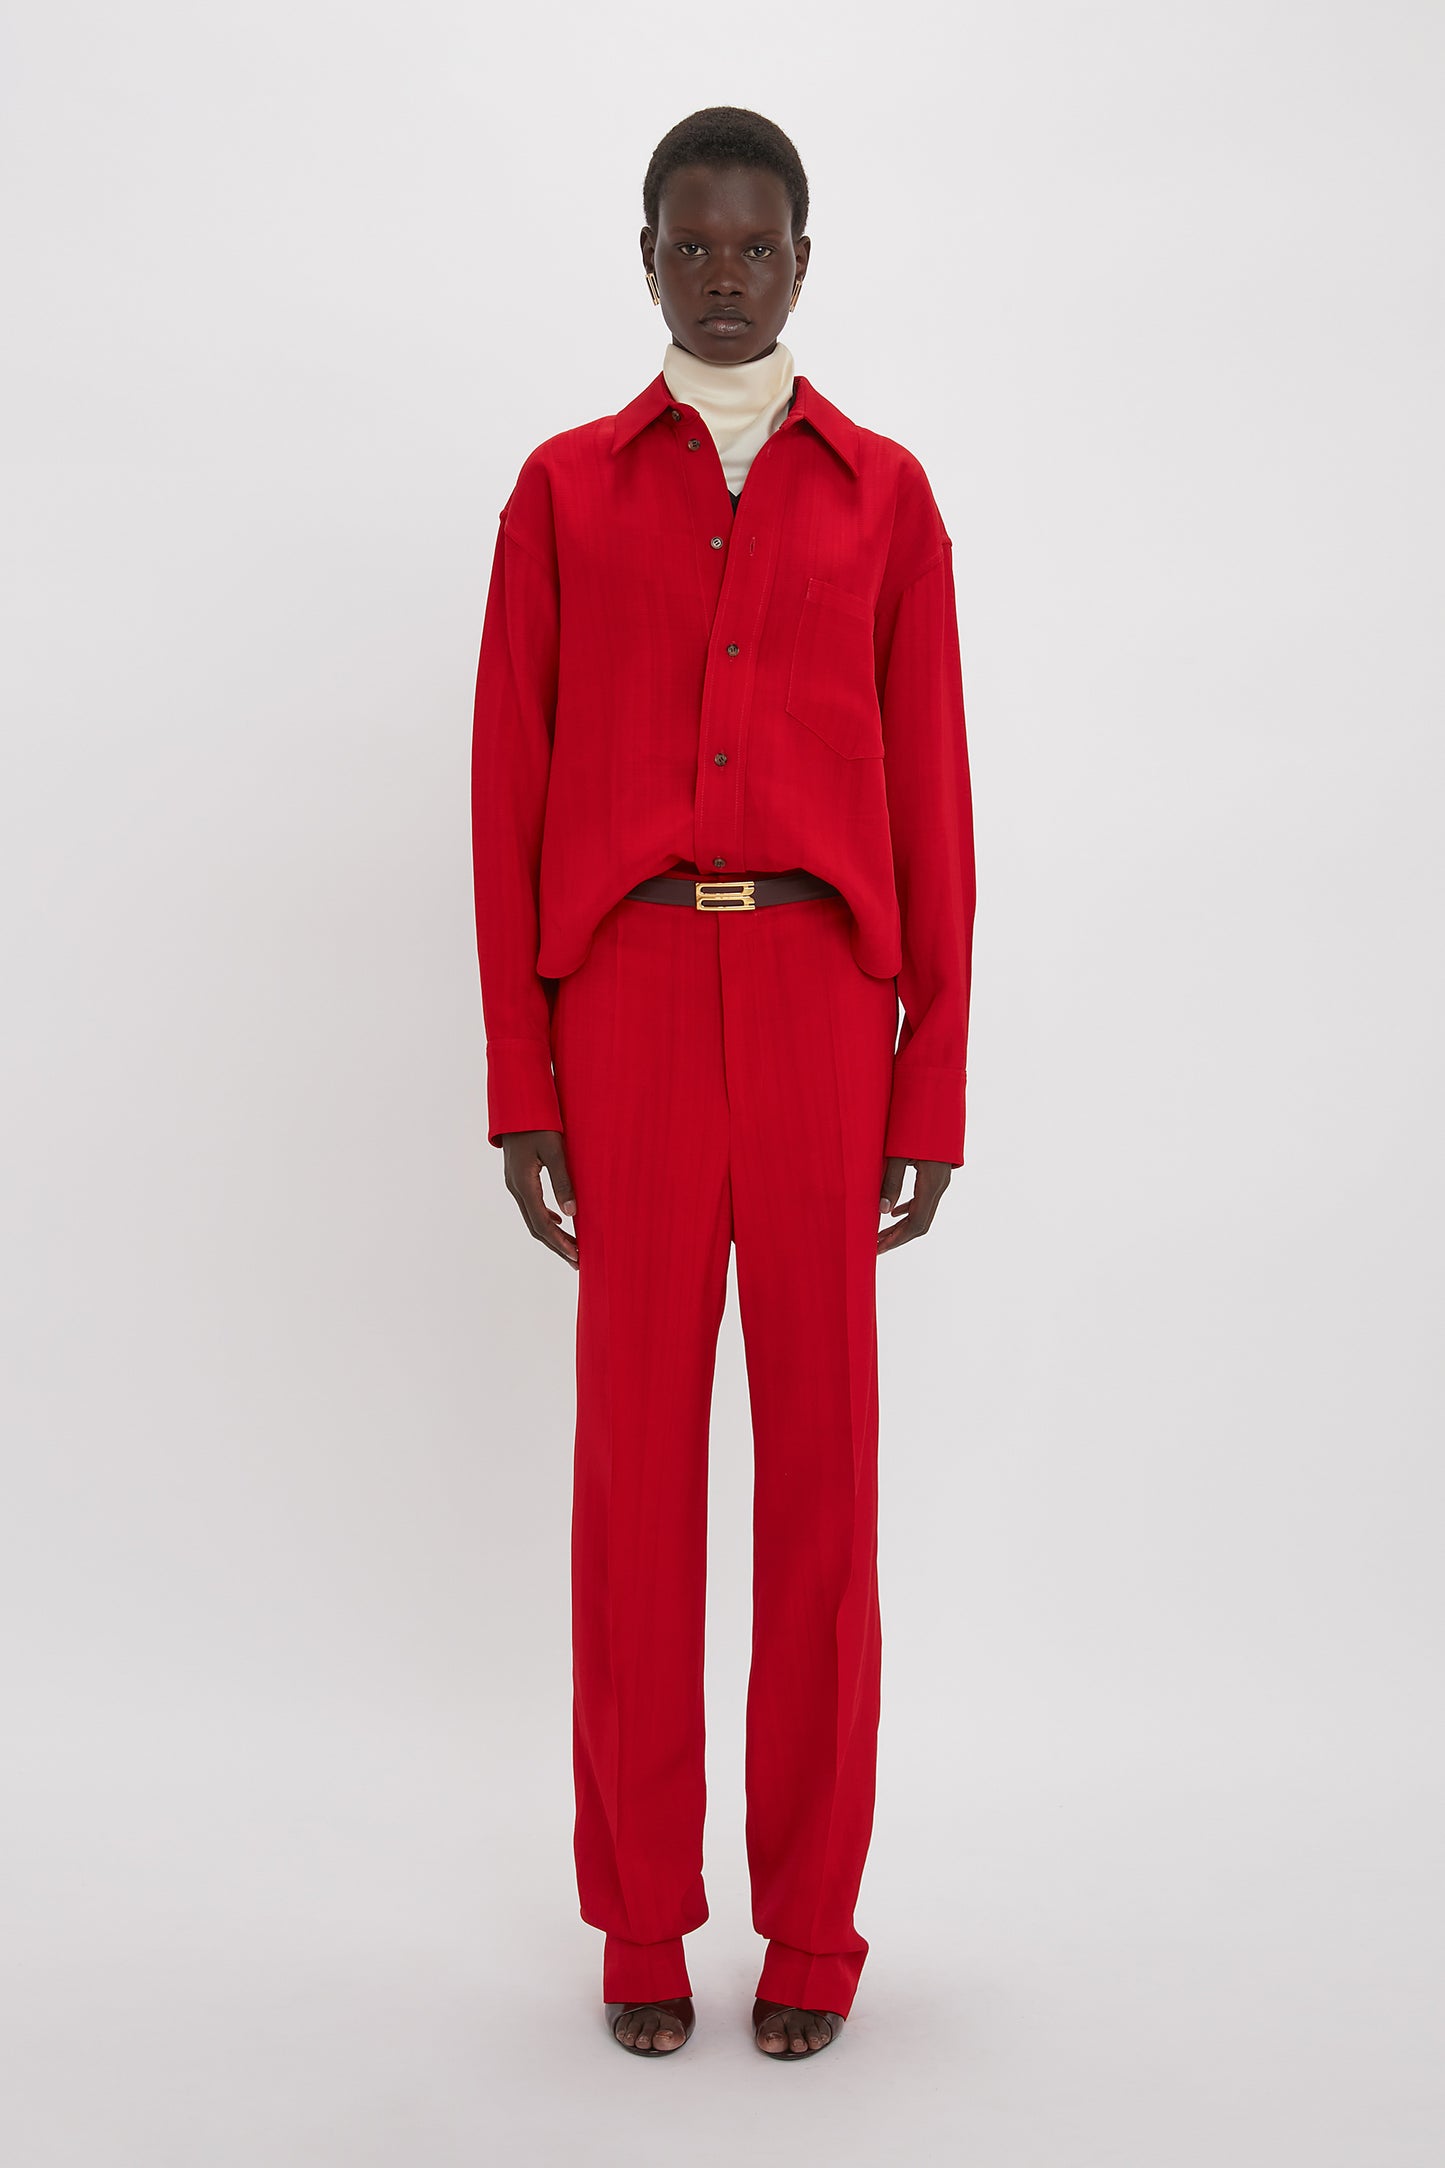 Person standing against a white background, wearing a red button-up shirt and matching Tapered Leg Trouser In Carmine by Victoria Beckham with a white turtleneck underneath. They have a neutral expression.